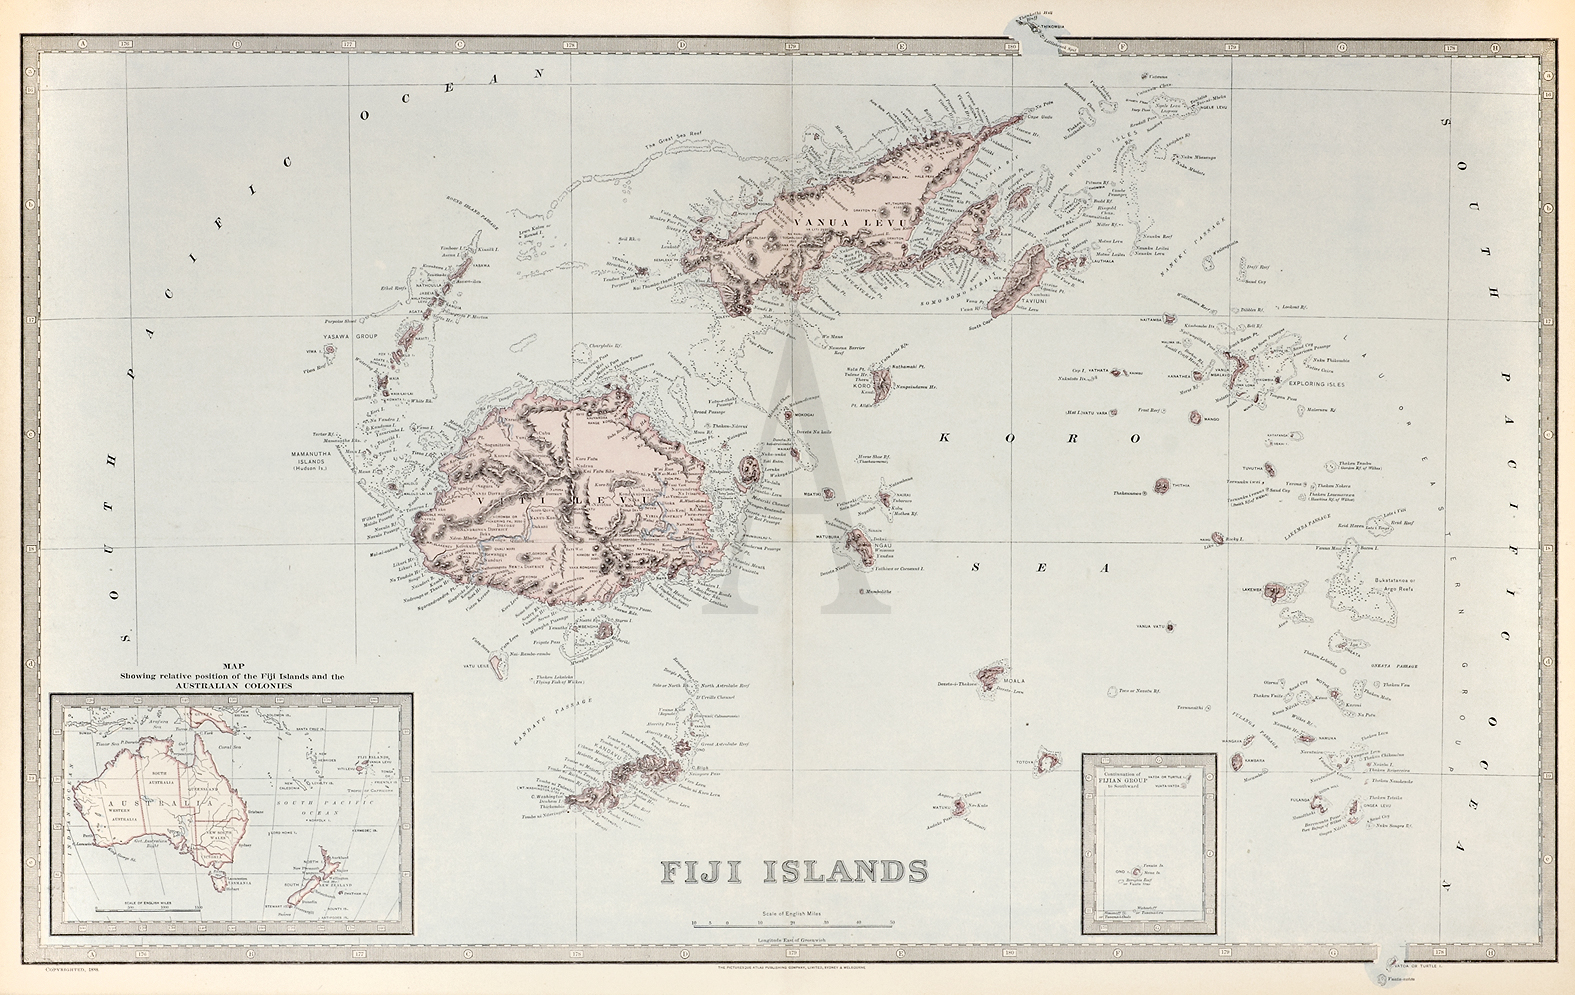 Fiji Islands. - Antique Map from 1888